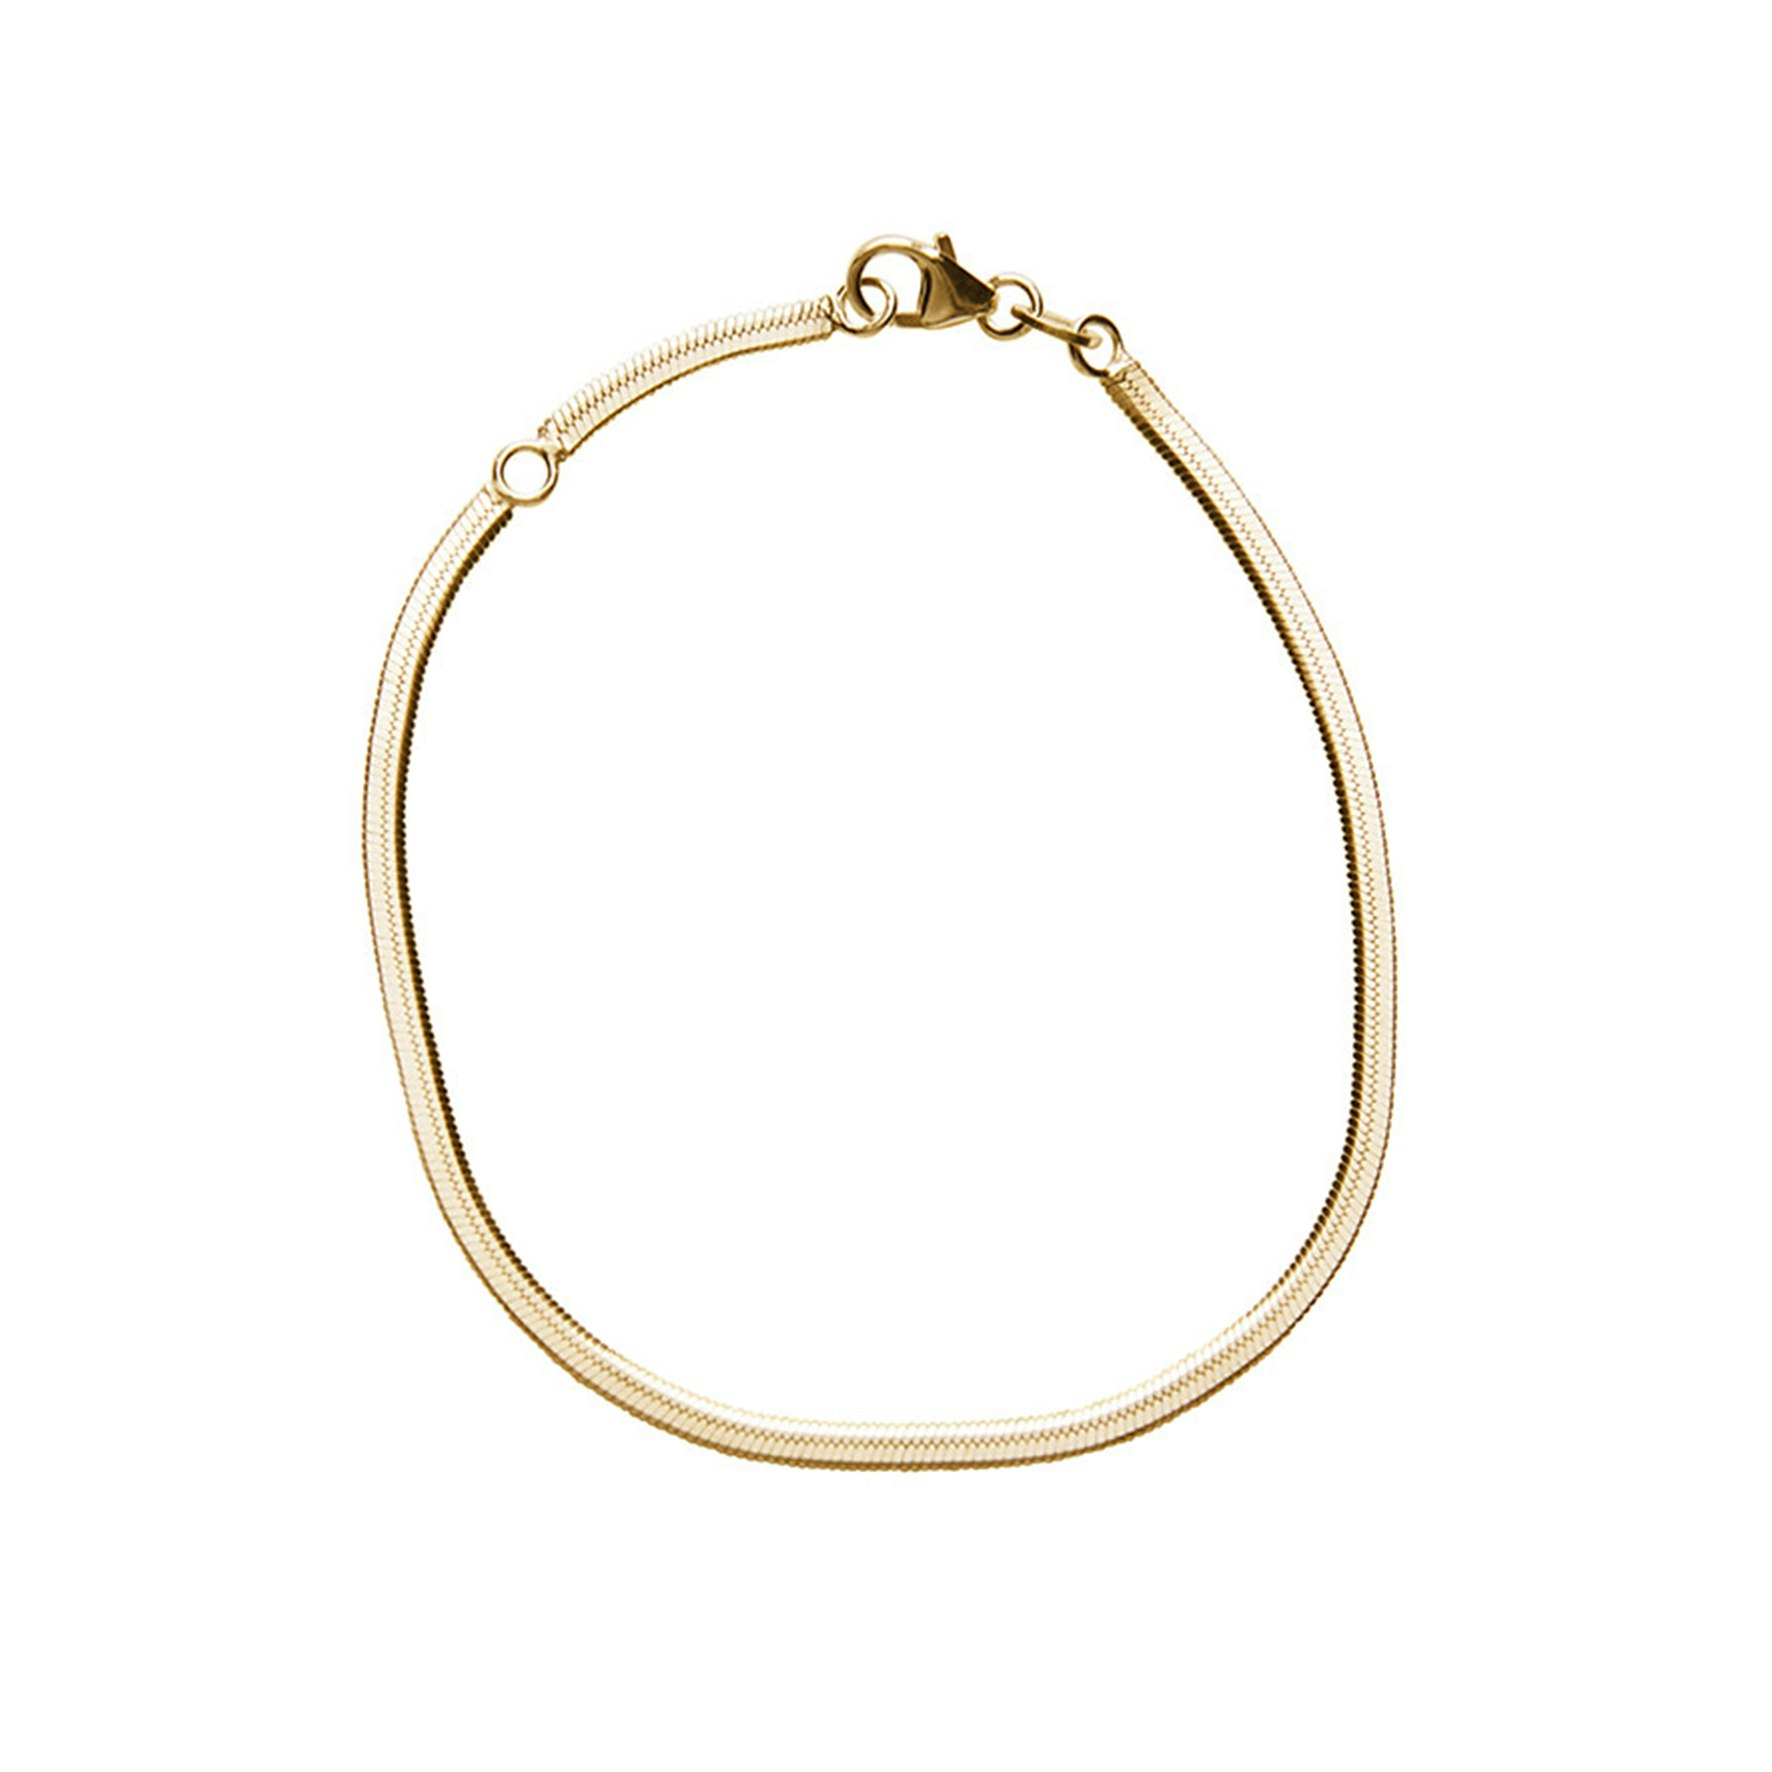 Rylee Bracelet from Pico in Goldplated Silver Sterling 925